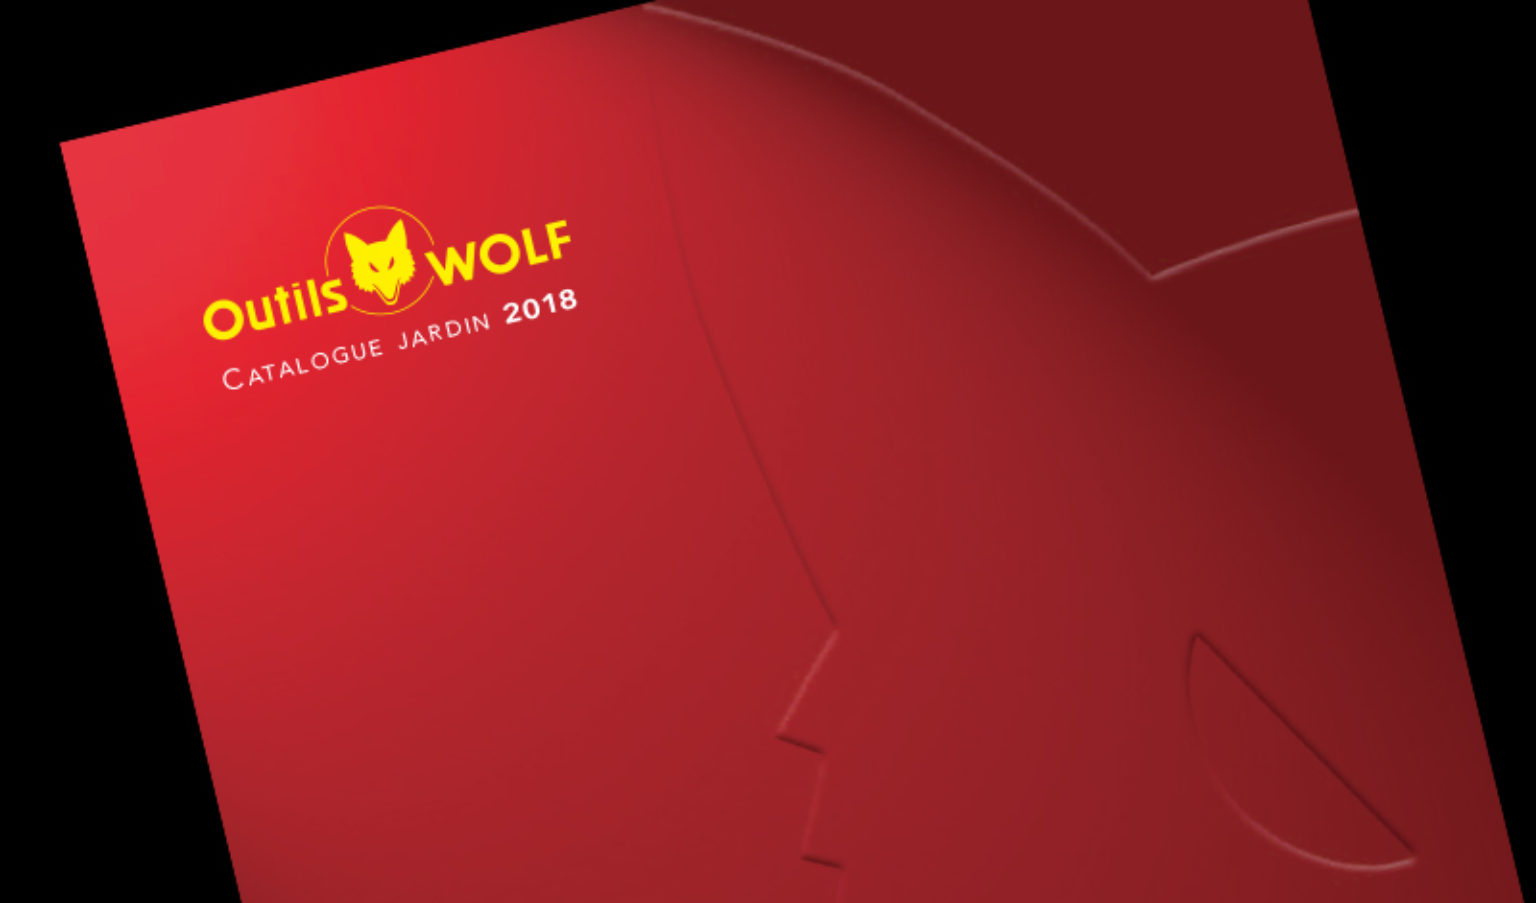 Catalogue gamme Outils Wolf